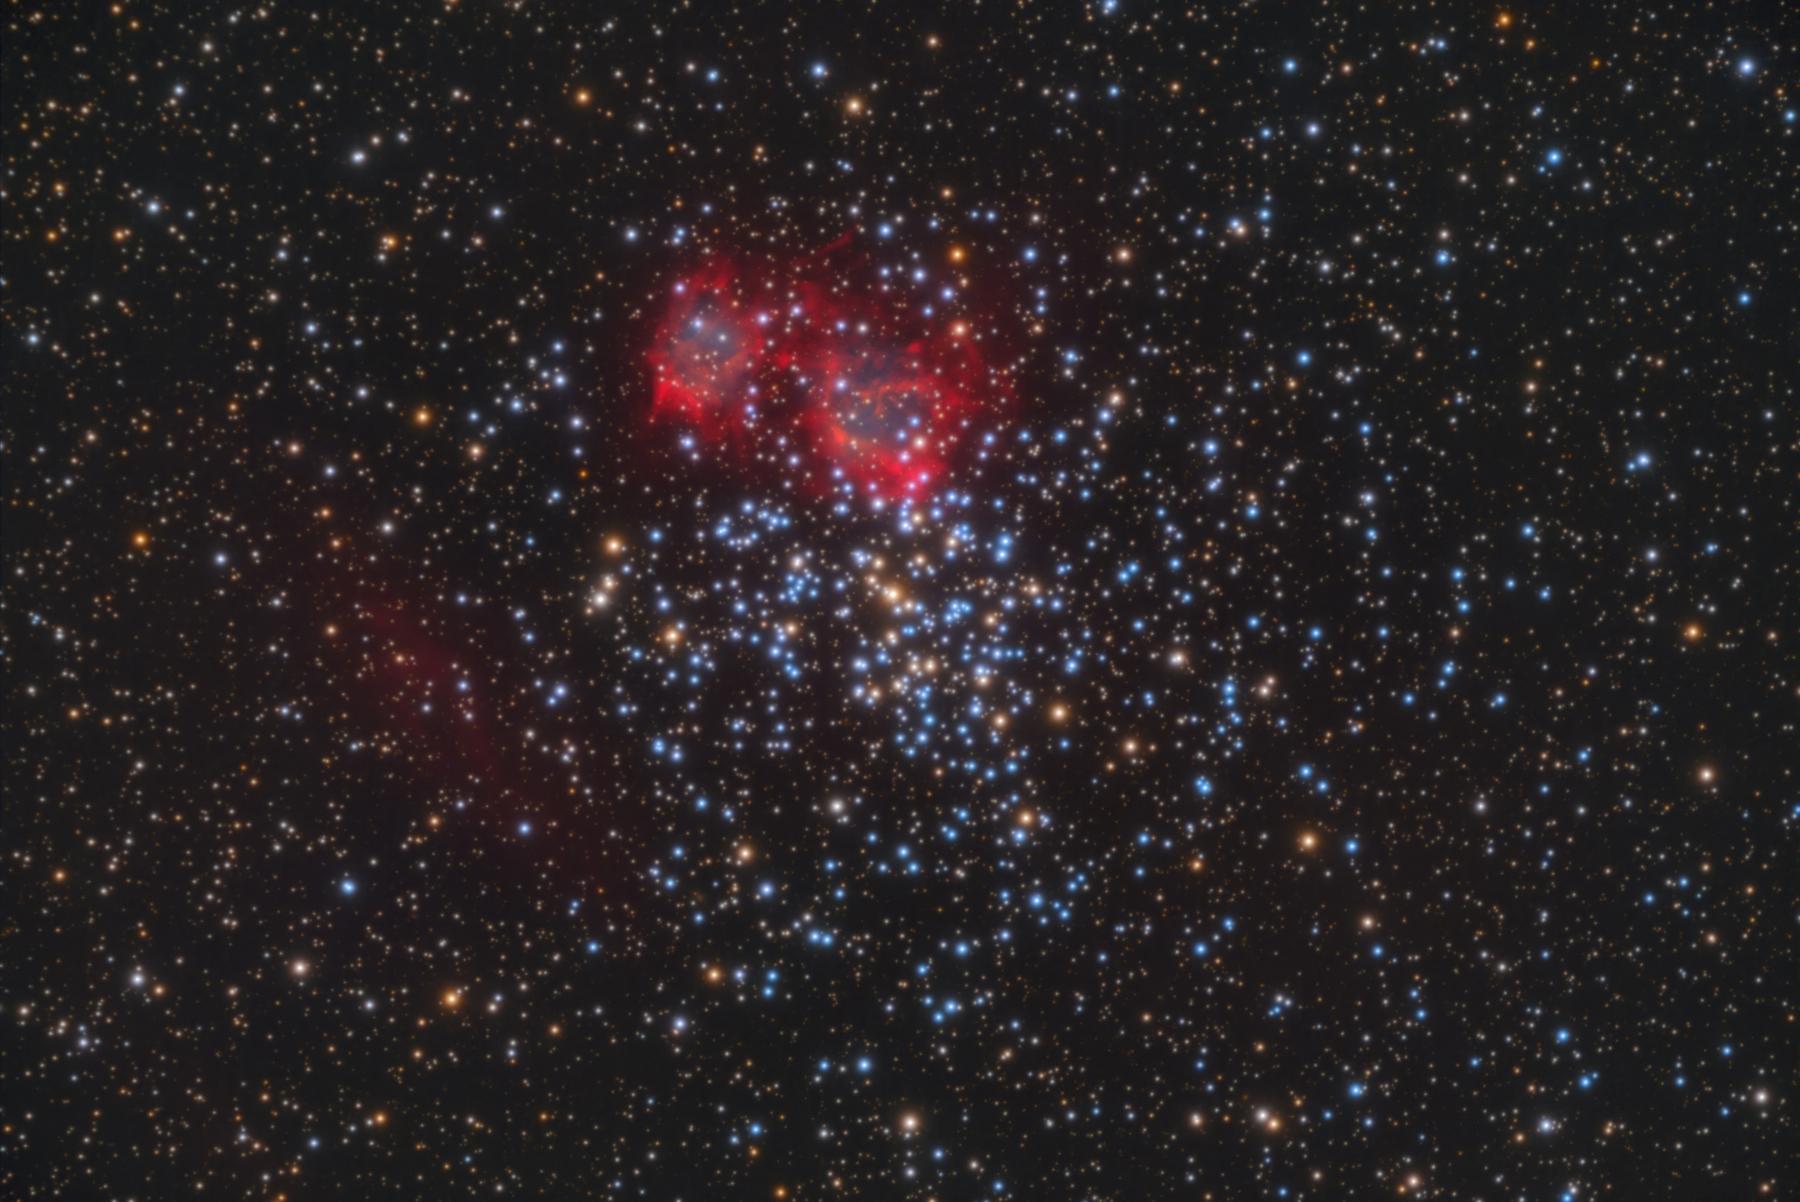 Planetary nebula in open cluster M37: The central star reveals details of its life